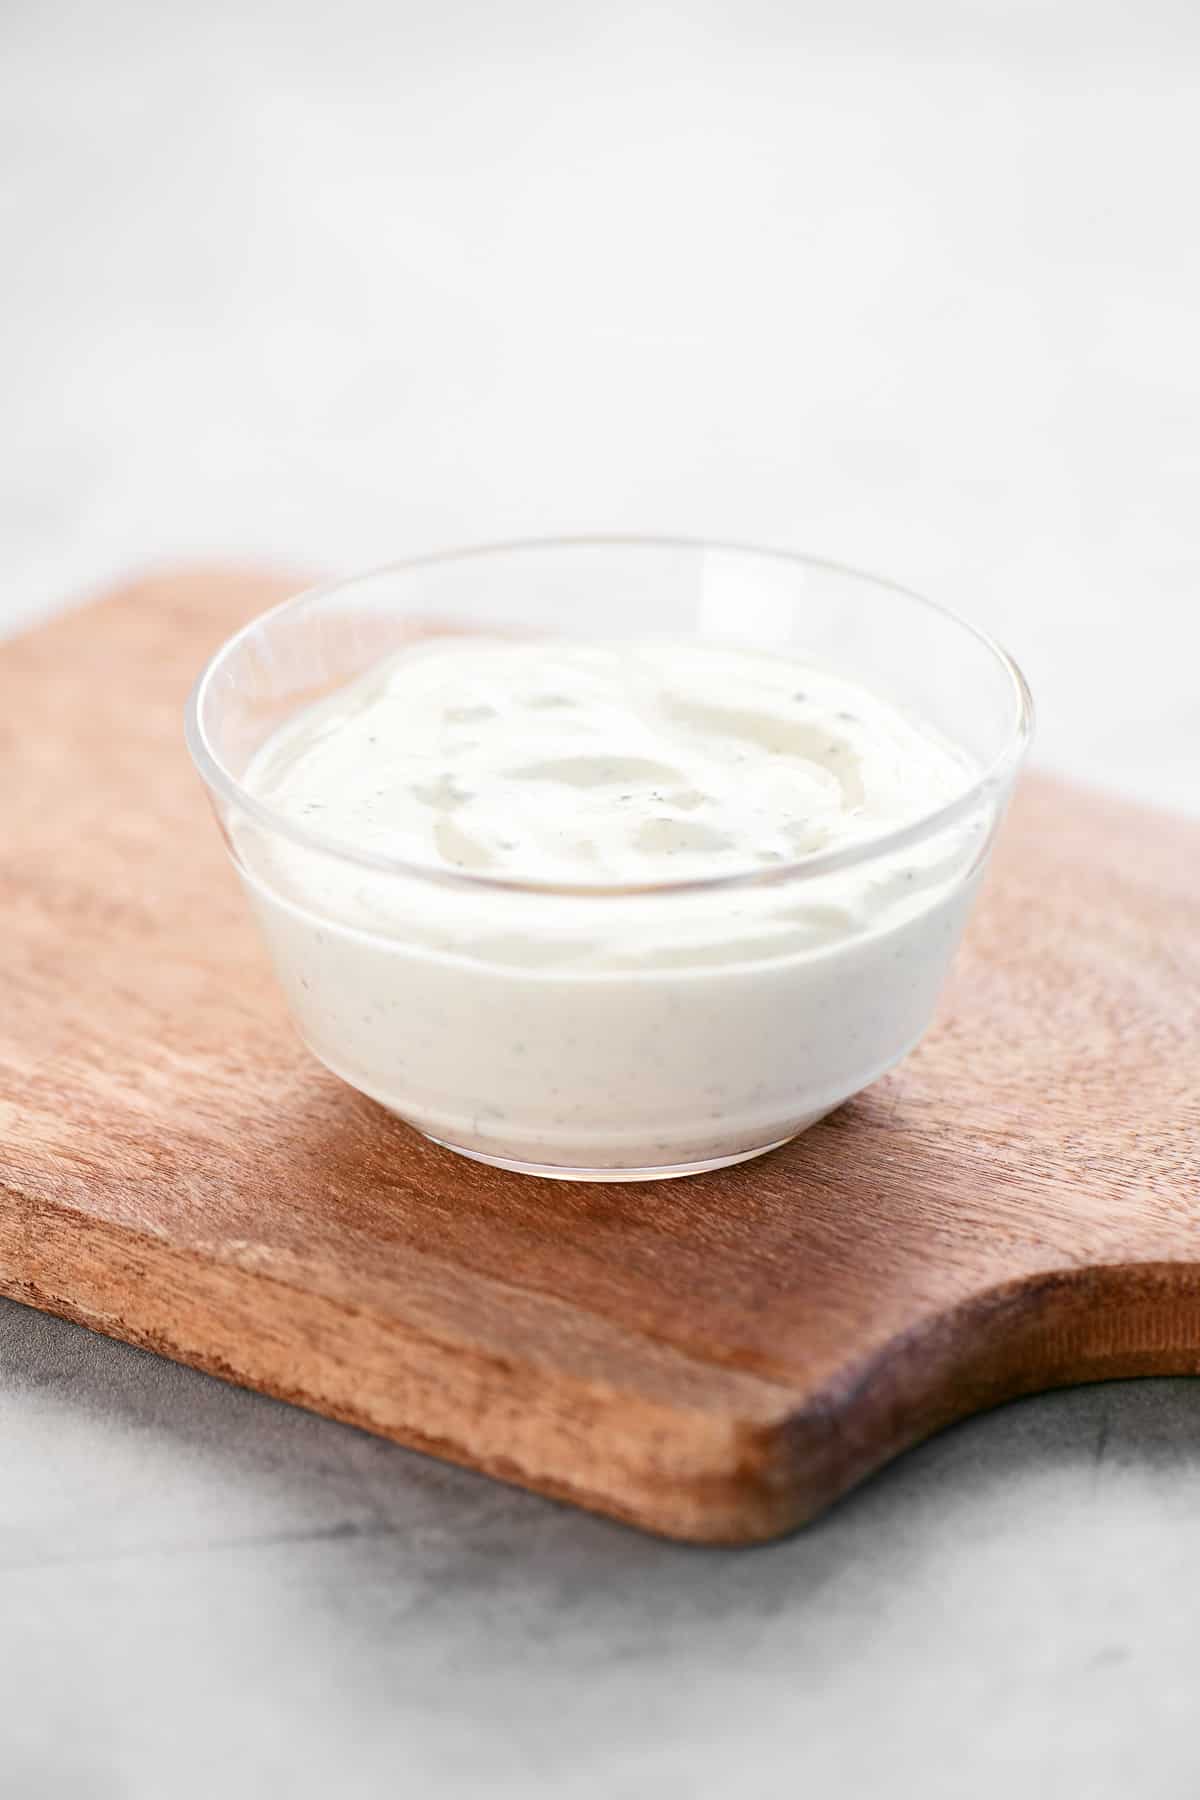 Ranch sauce in a plastic dipping bowl.